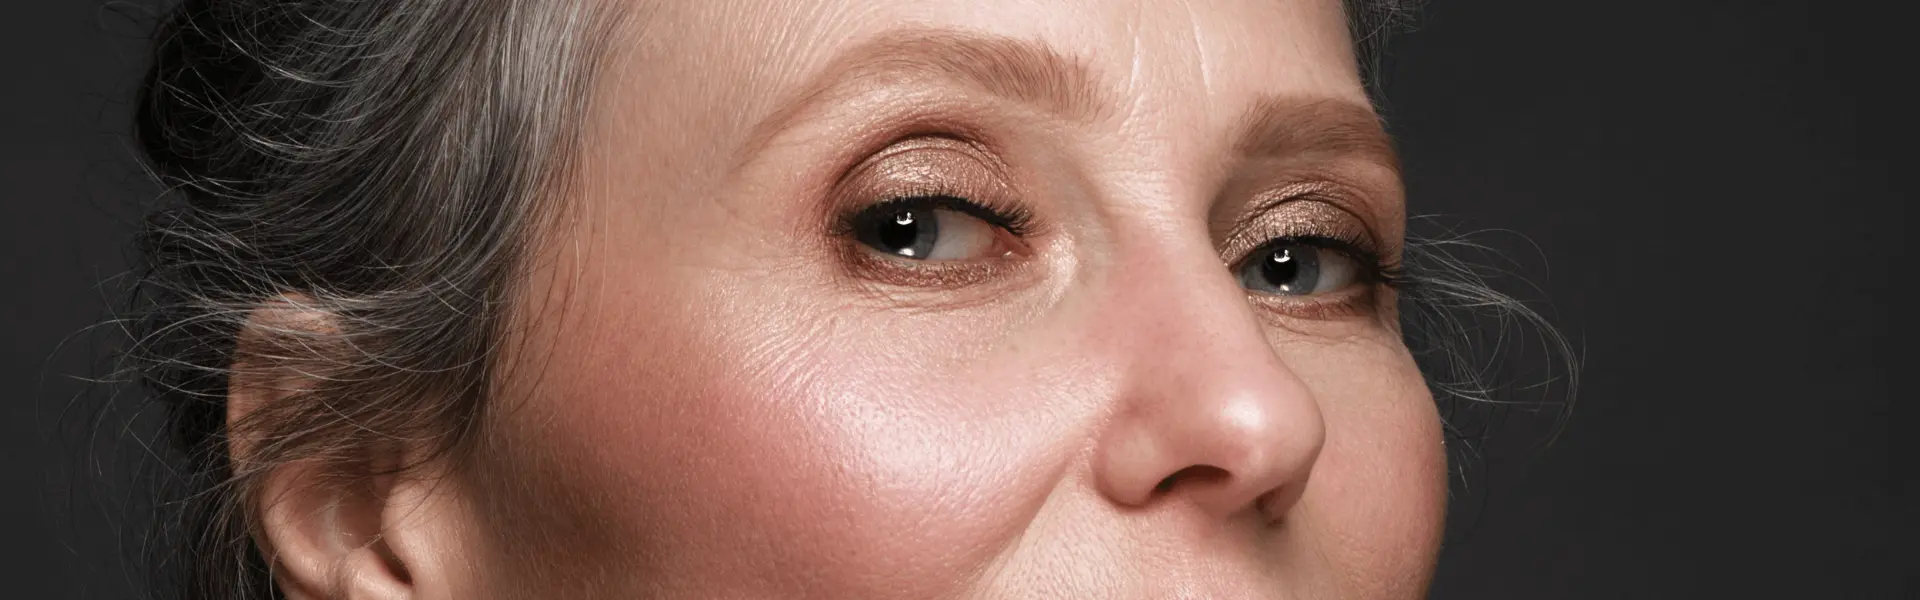 A 3d rendering of an older woman's face.